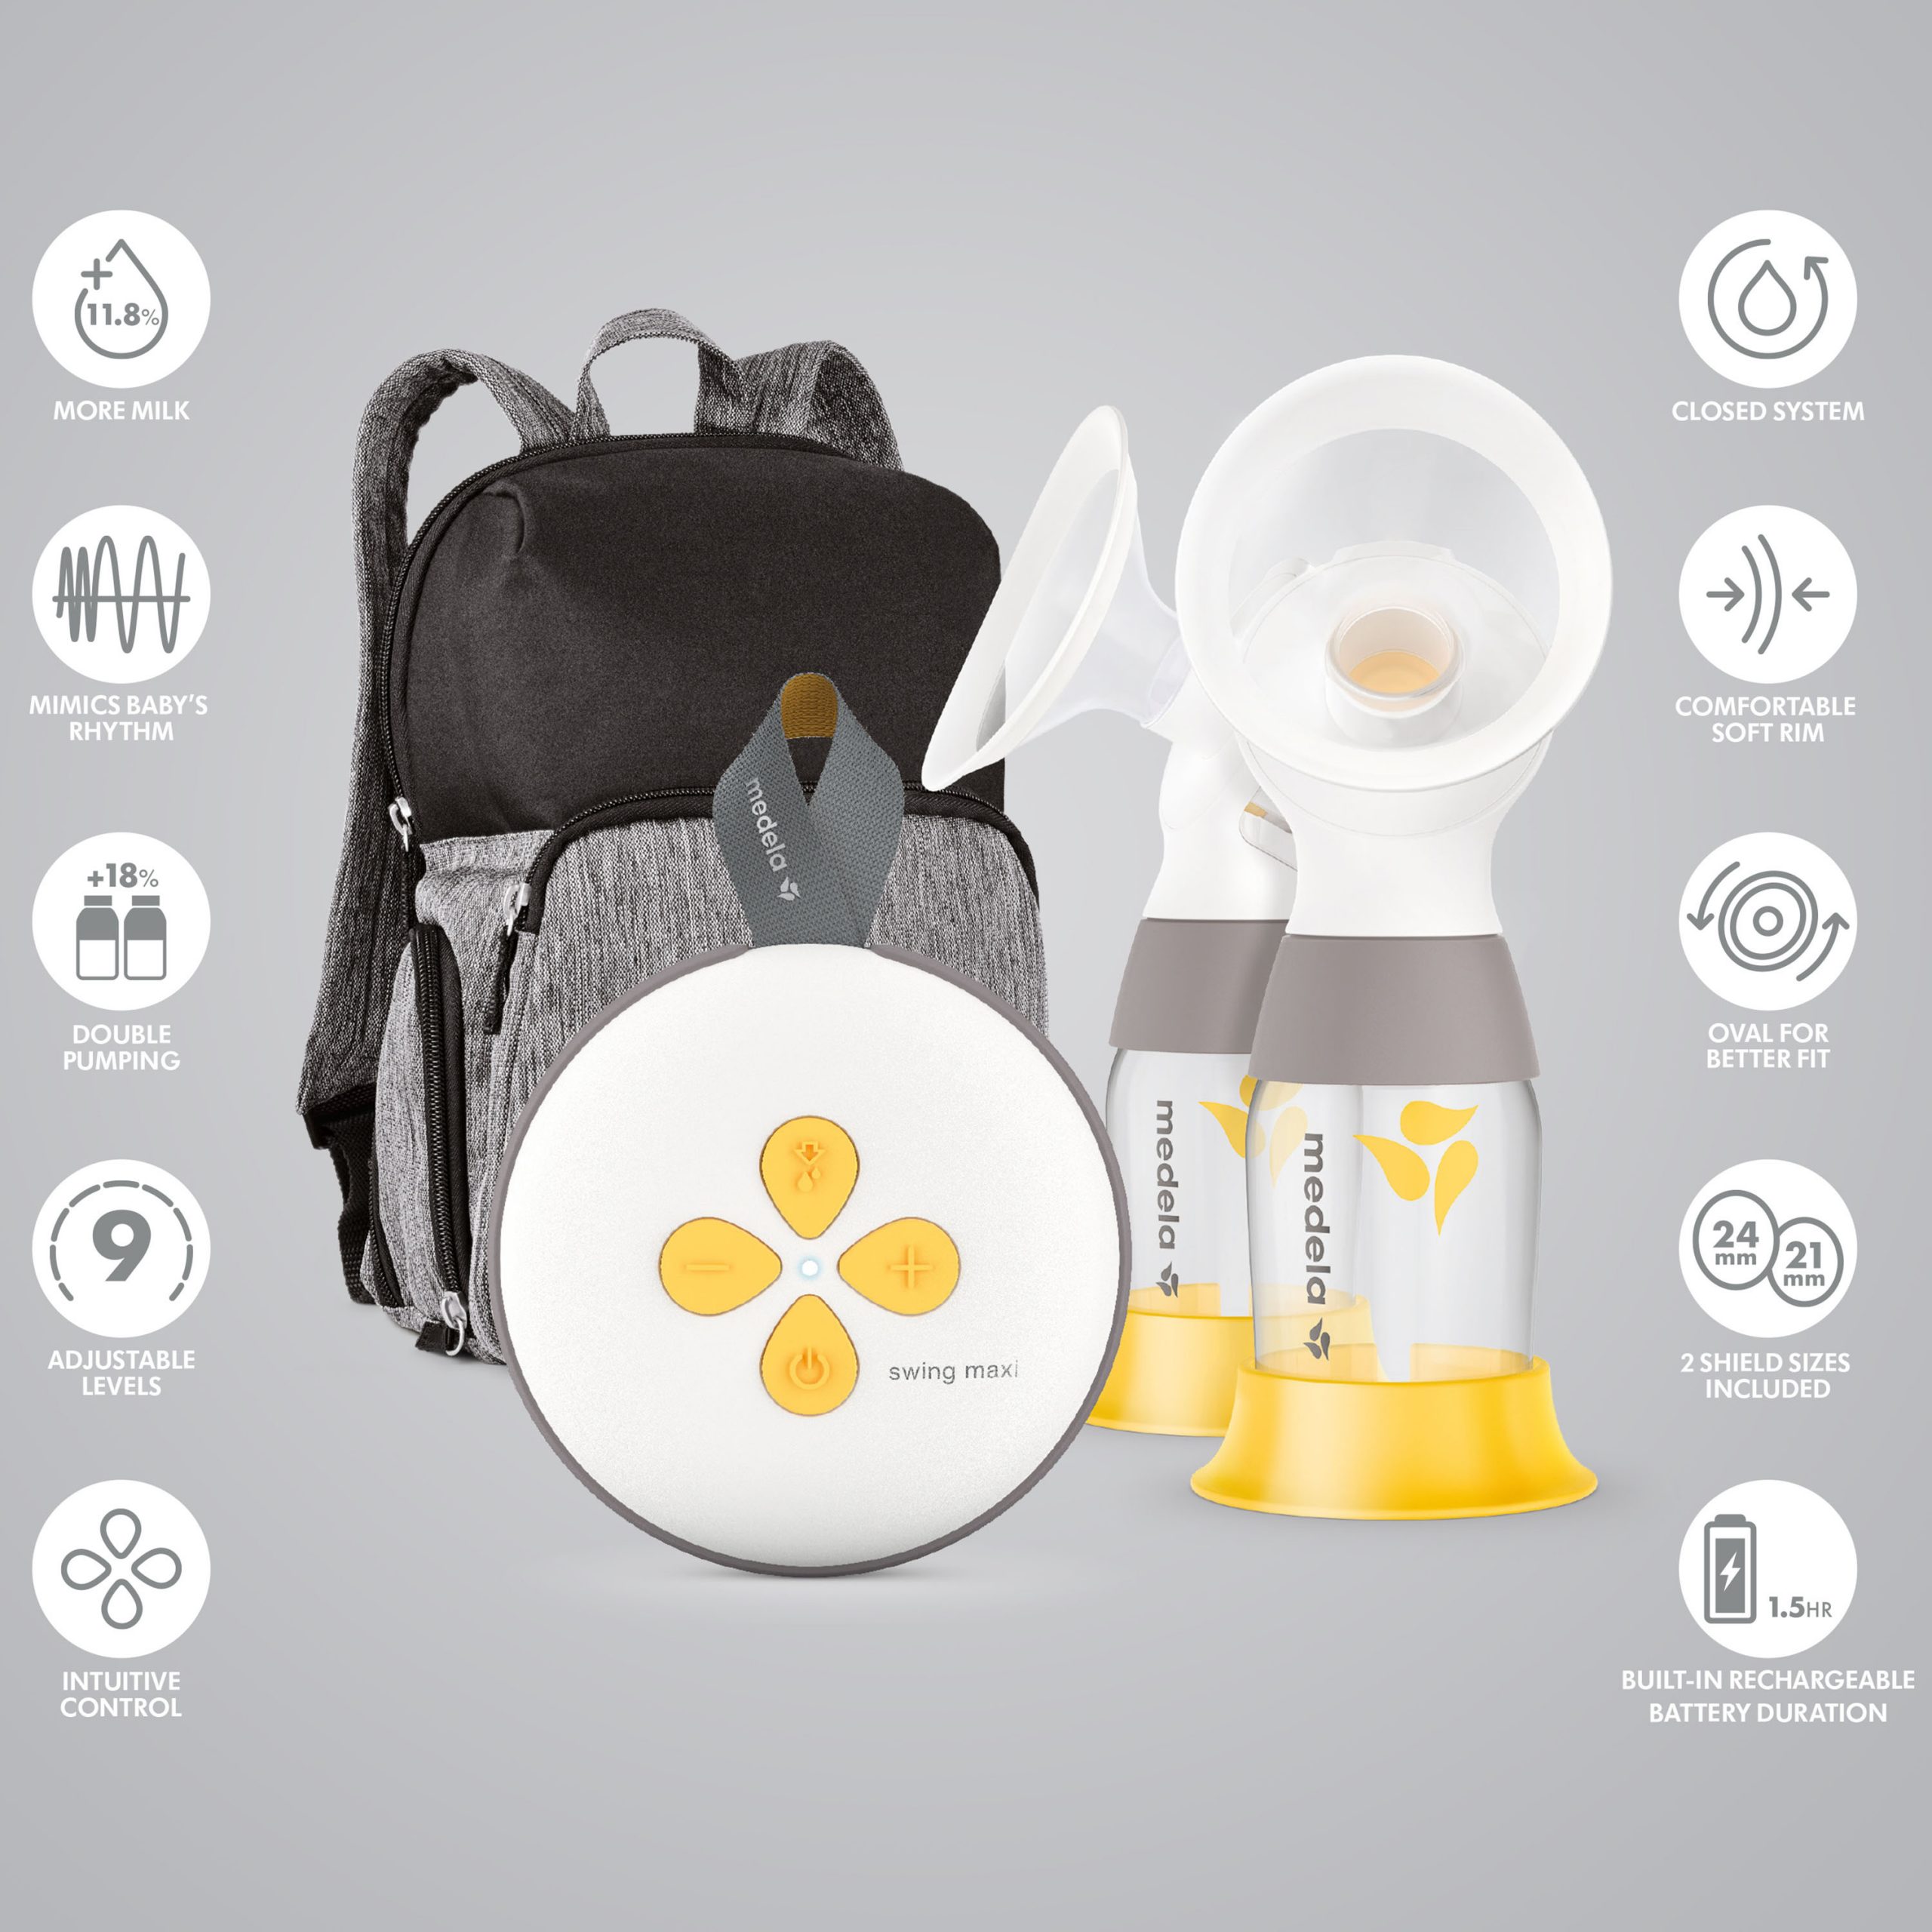 Medela Breast Pump, Swing Maxi Double Electric, Portable Breast Pump, USB-C Rechargeable, Bluetooth